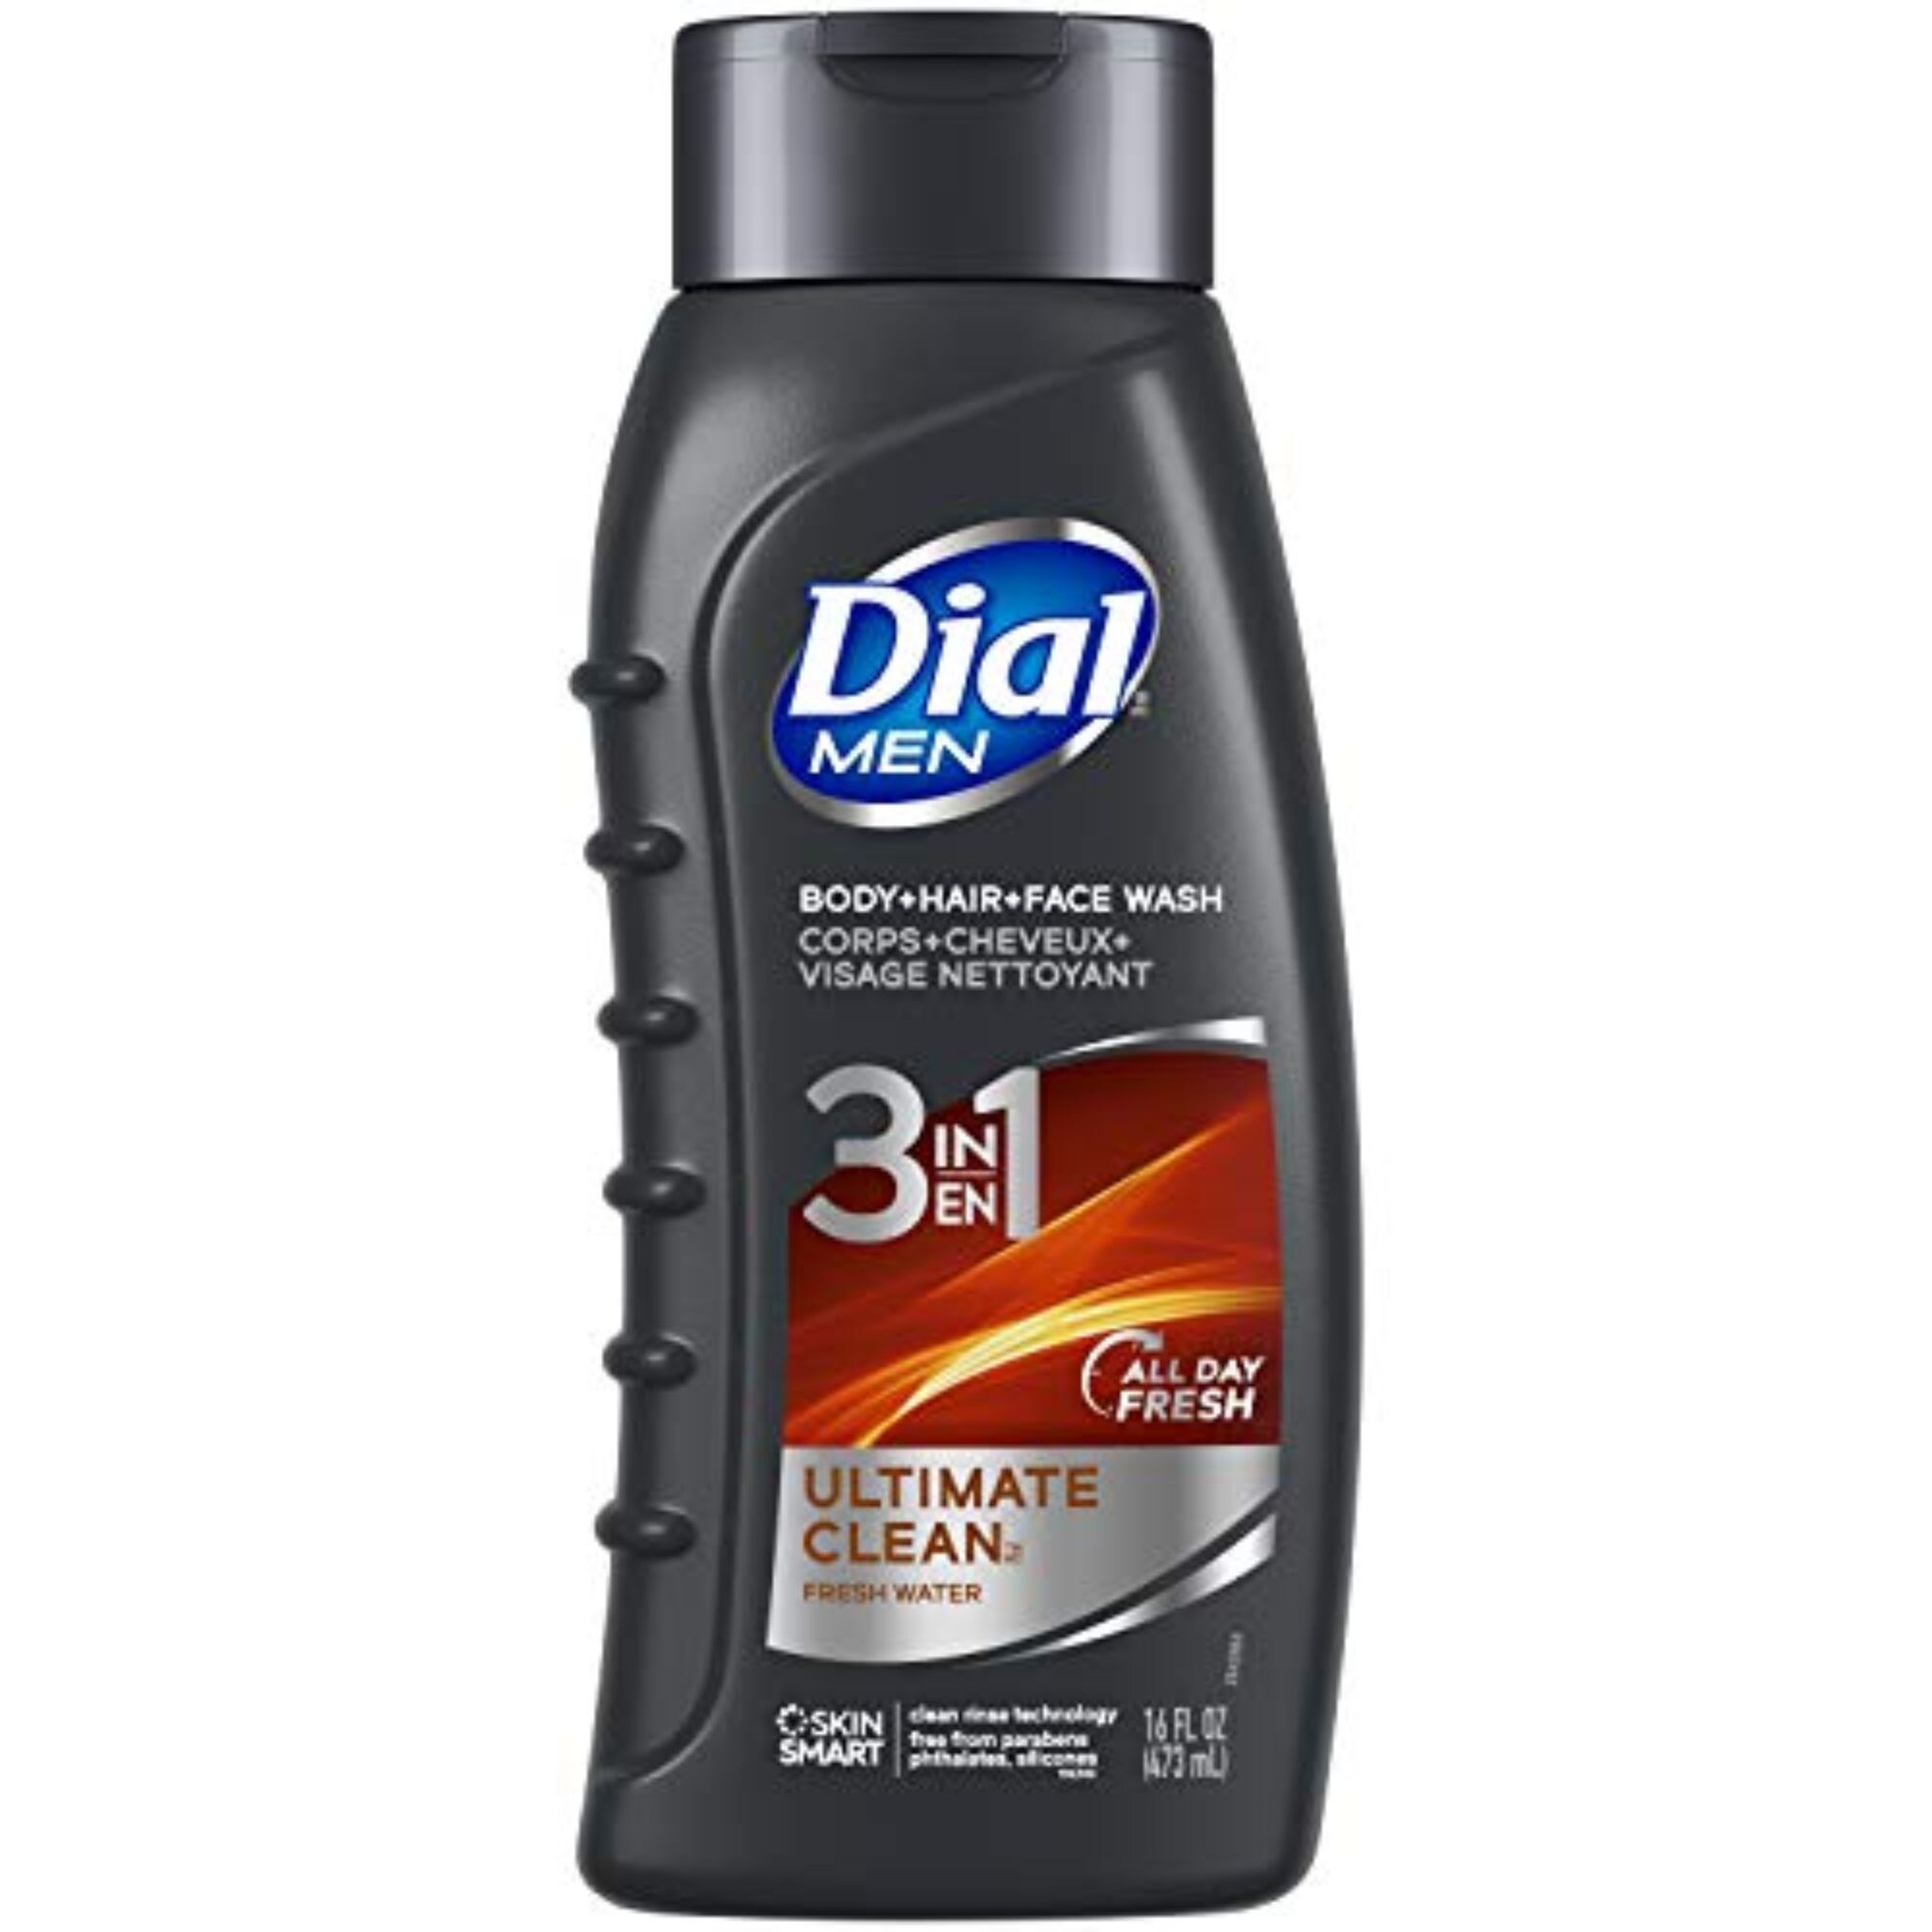 Dial Men 3in1 Ultimate Clean Body, Hair and Face Wash, 473ml, Carton of 6